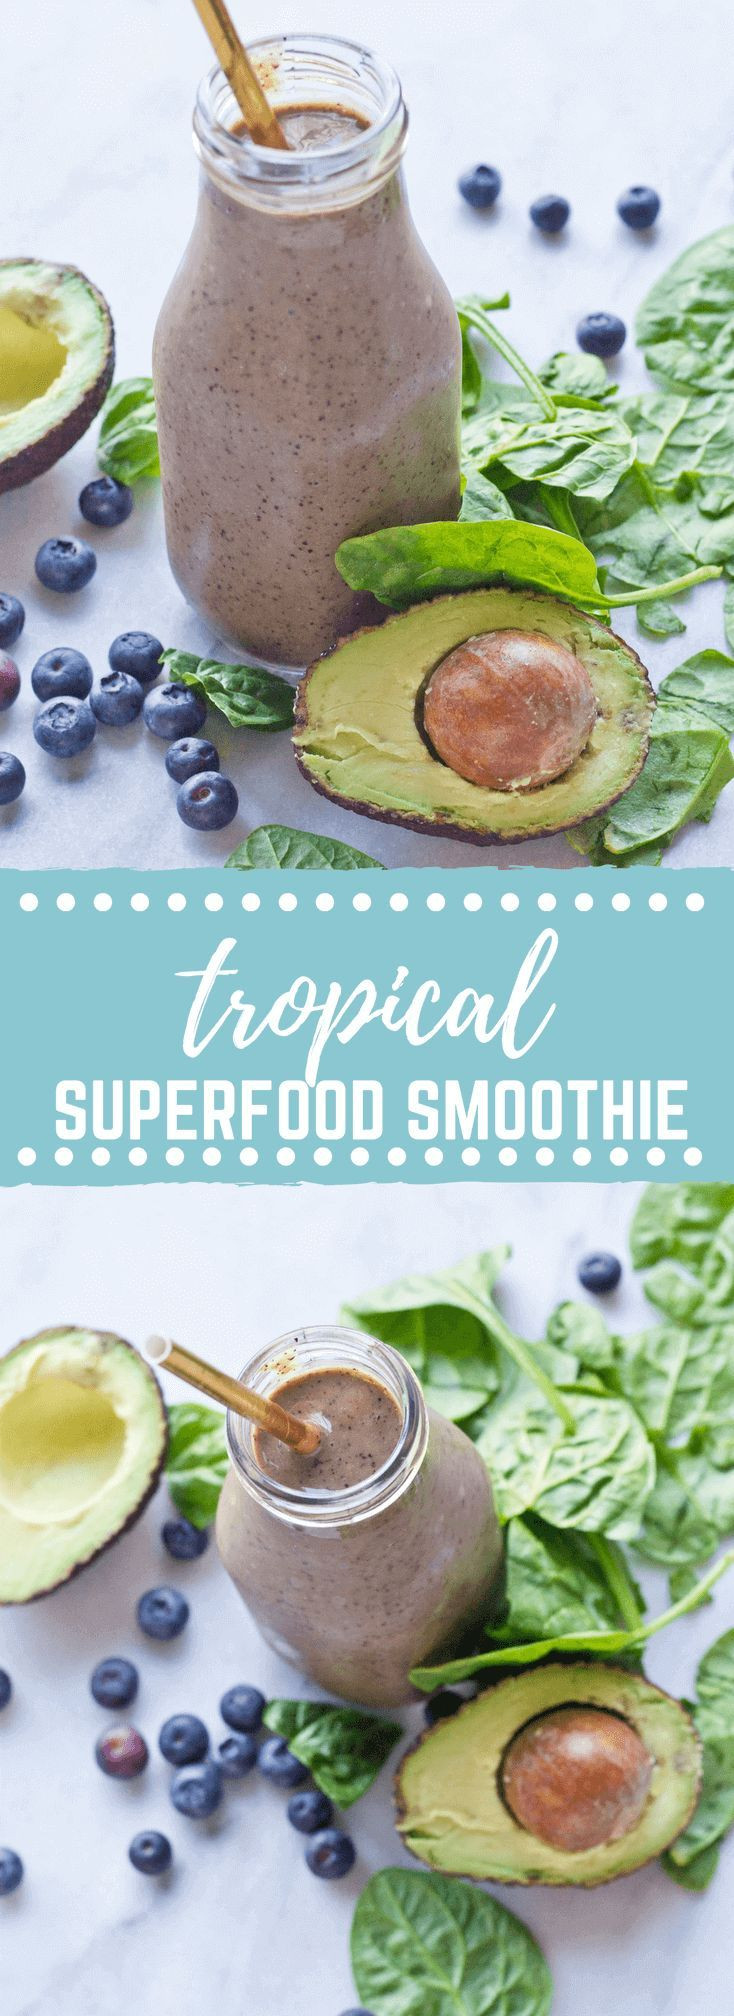 Superfood Smoothie Recipes
 Tropical Superfood Smoothie plus VIDEO Recipe